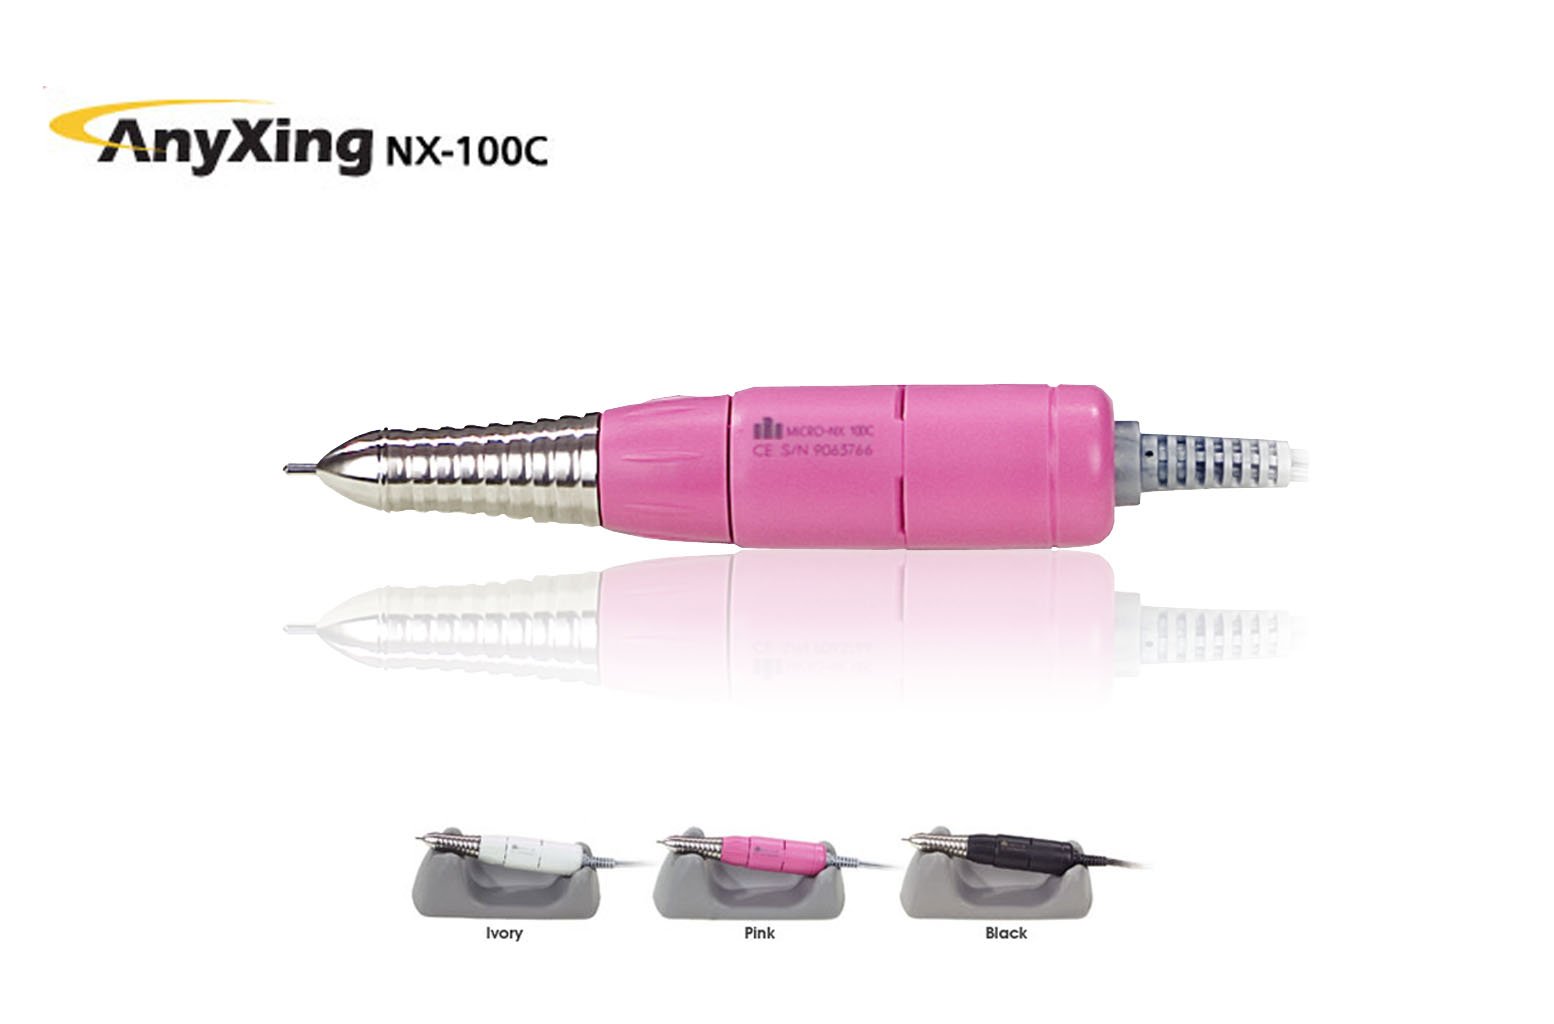 Electrtic Nail File Handpiece Anyxing Nx-100c - Buy Nail Handpiece Accessory